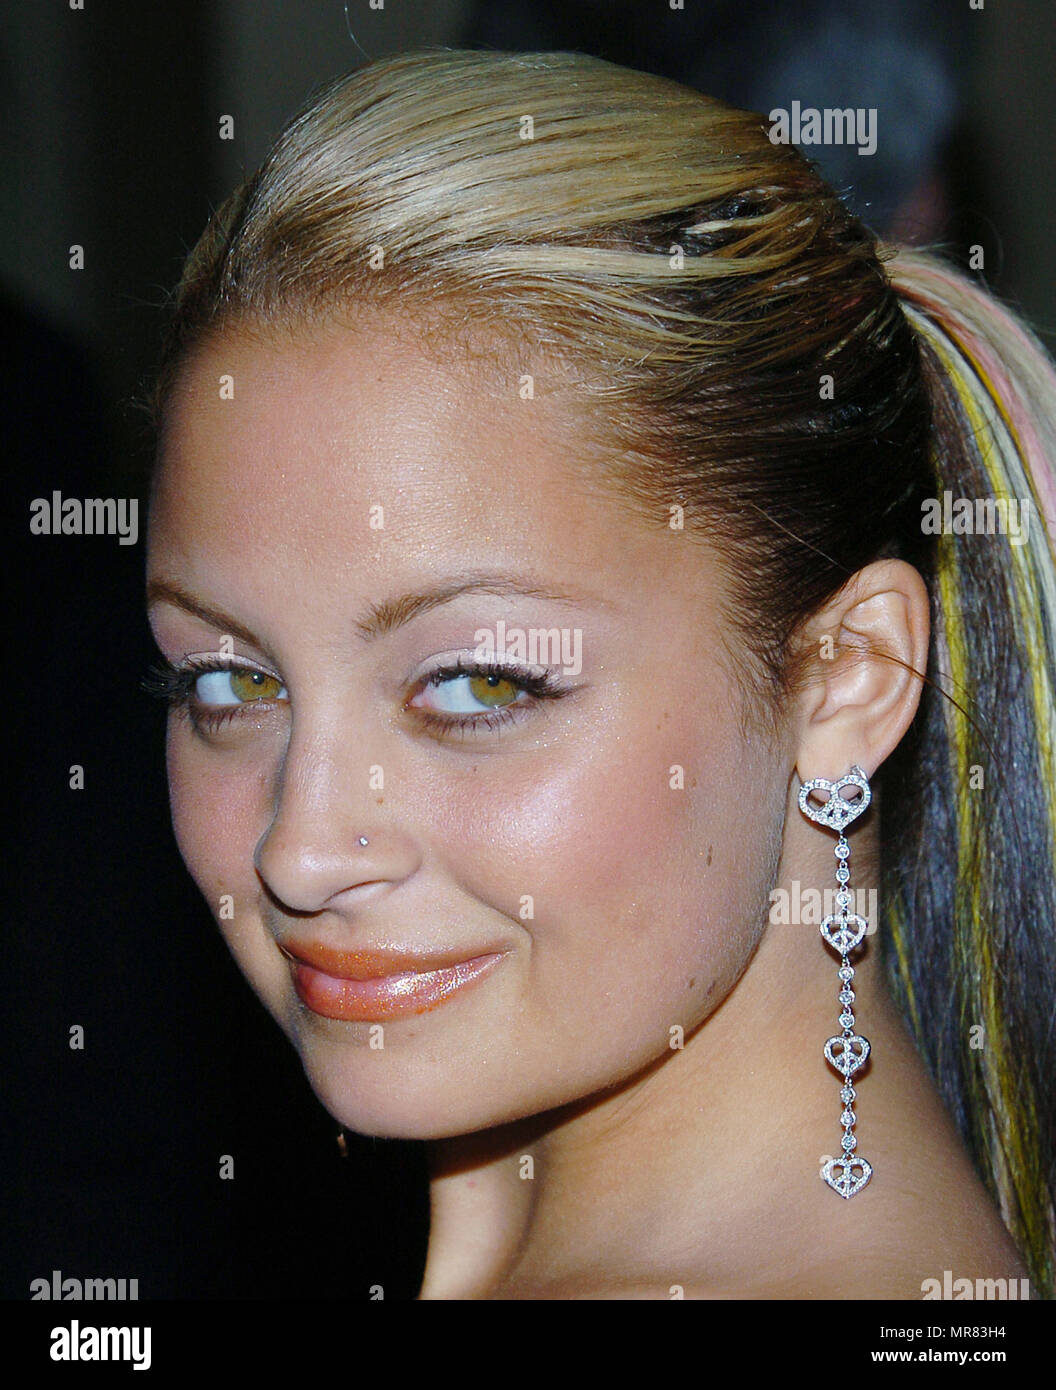 Nicole Richie arriving at the ACE Eddie Awards at the Beverly Hilton Hotel in Los Angeles. February 15, 2004.RichieNicole060 Red Carpet Event, Vertical, USA, Film Industry, Celebrities,  Photography, Bestof, Arts Culture and Entertainment, Topix Celebrities fashion /  Vertical, Best of, Event in Hollywood Life - California,  Red Carpet and backstage, USA, Film Industry, Celebrities,  movie celebrities, TV celebrities, Music celebrities, Photography, Bestof, Arts Culture and Entertainment,  Topix, headshot, vertical, one person,, from the year , 2003, inquiry tsuni@Gamma-USA.com Stock Photo